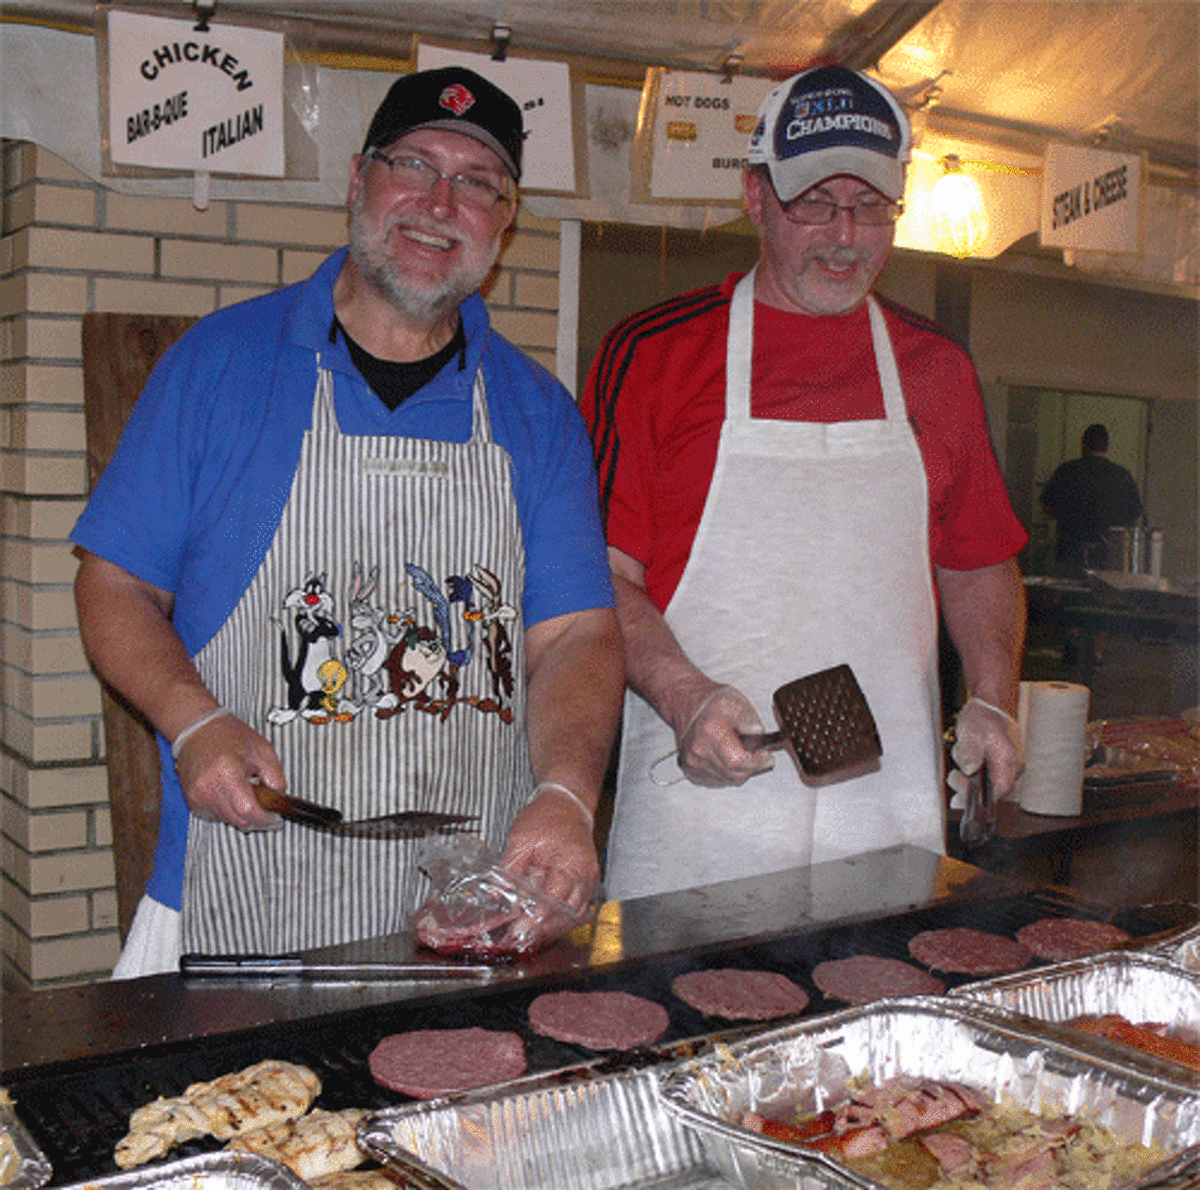 St. Joseph Parish members Bob Peel, left, and Tony Yarrish help with the cooking at the carnival and food fest on Coram Avenue, which continues through Saturday night.